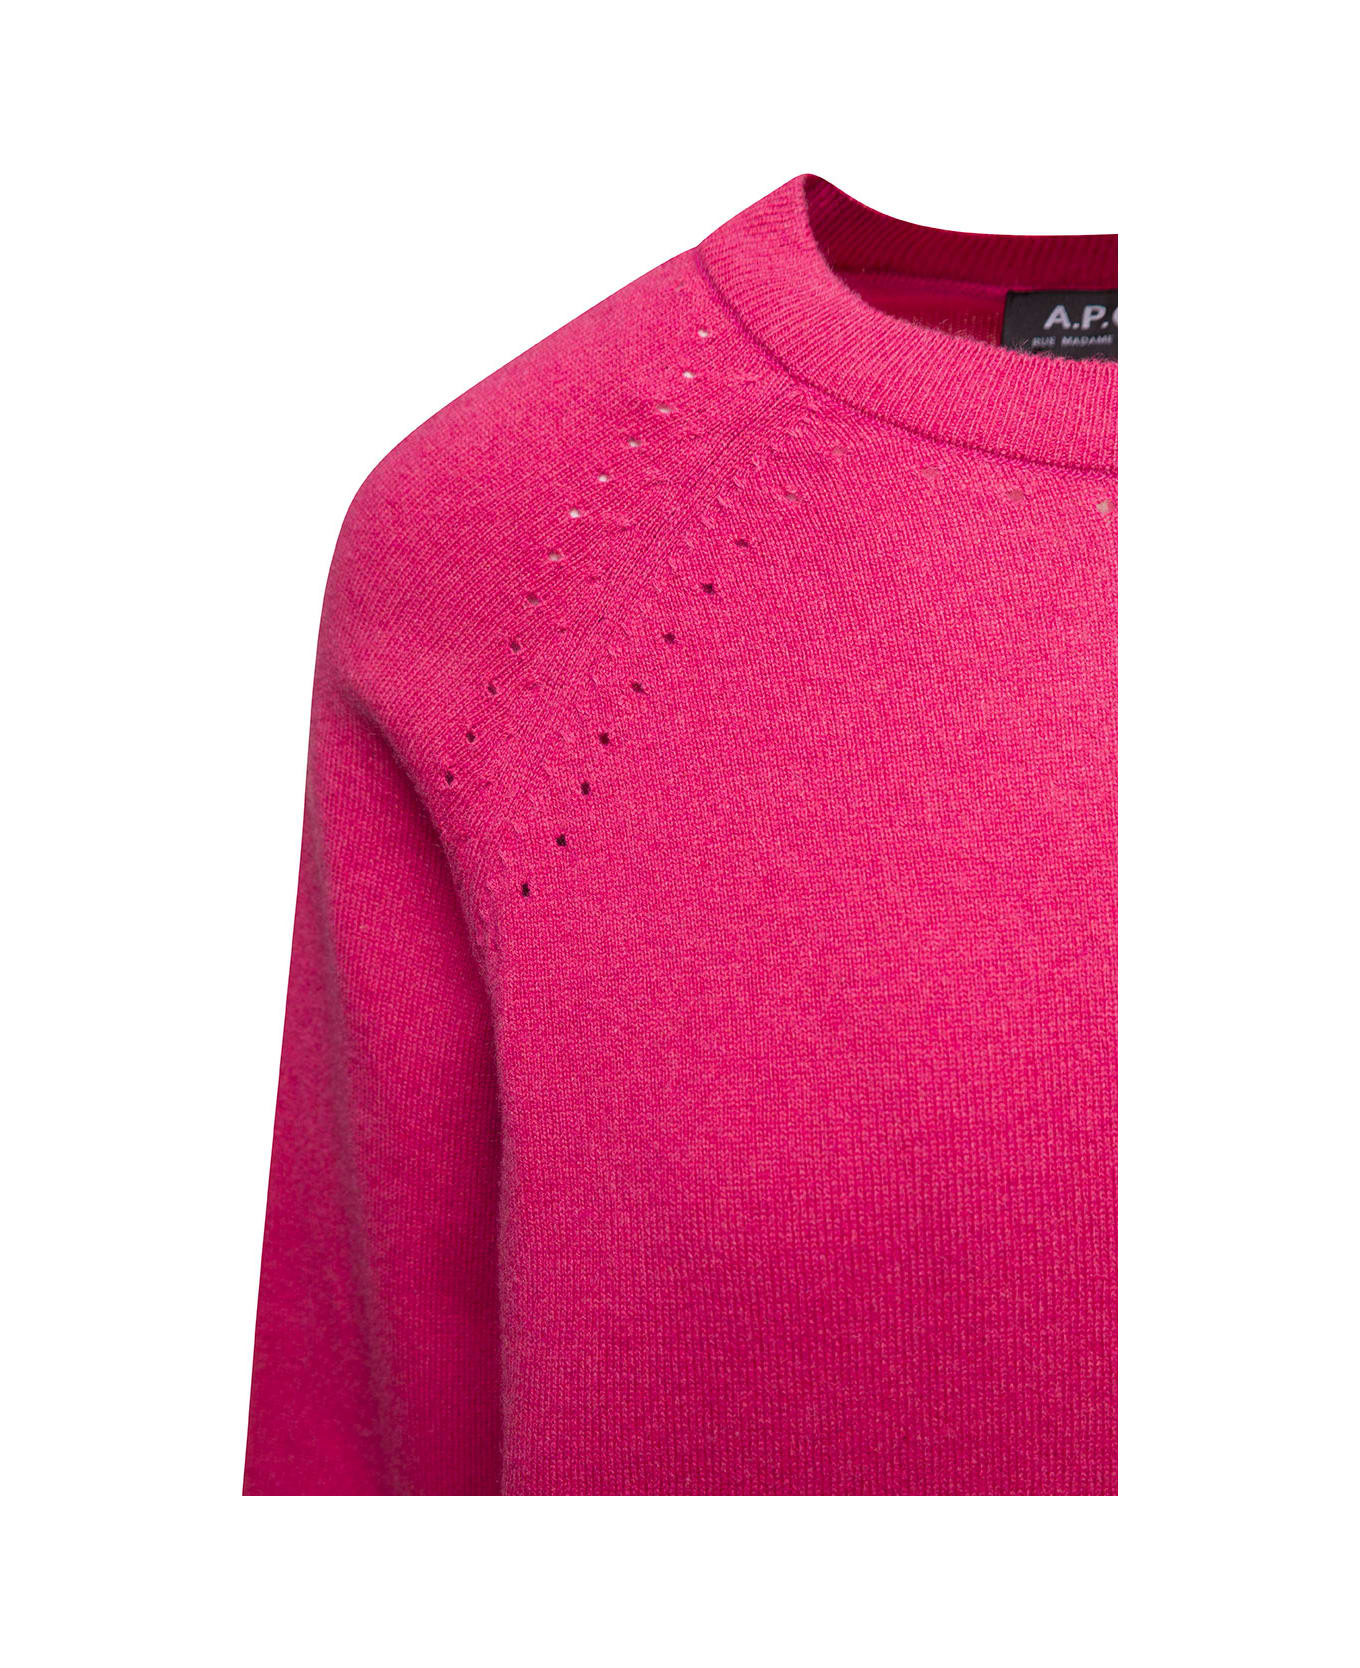 A.P.C. 'rosanna' Fuchsia Crewneck Sweater With Perforated Details In Cotton And Cashmere Woman - Fuxia ニットウェア